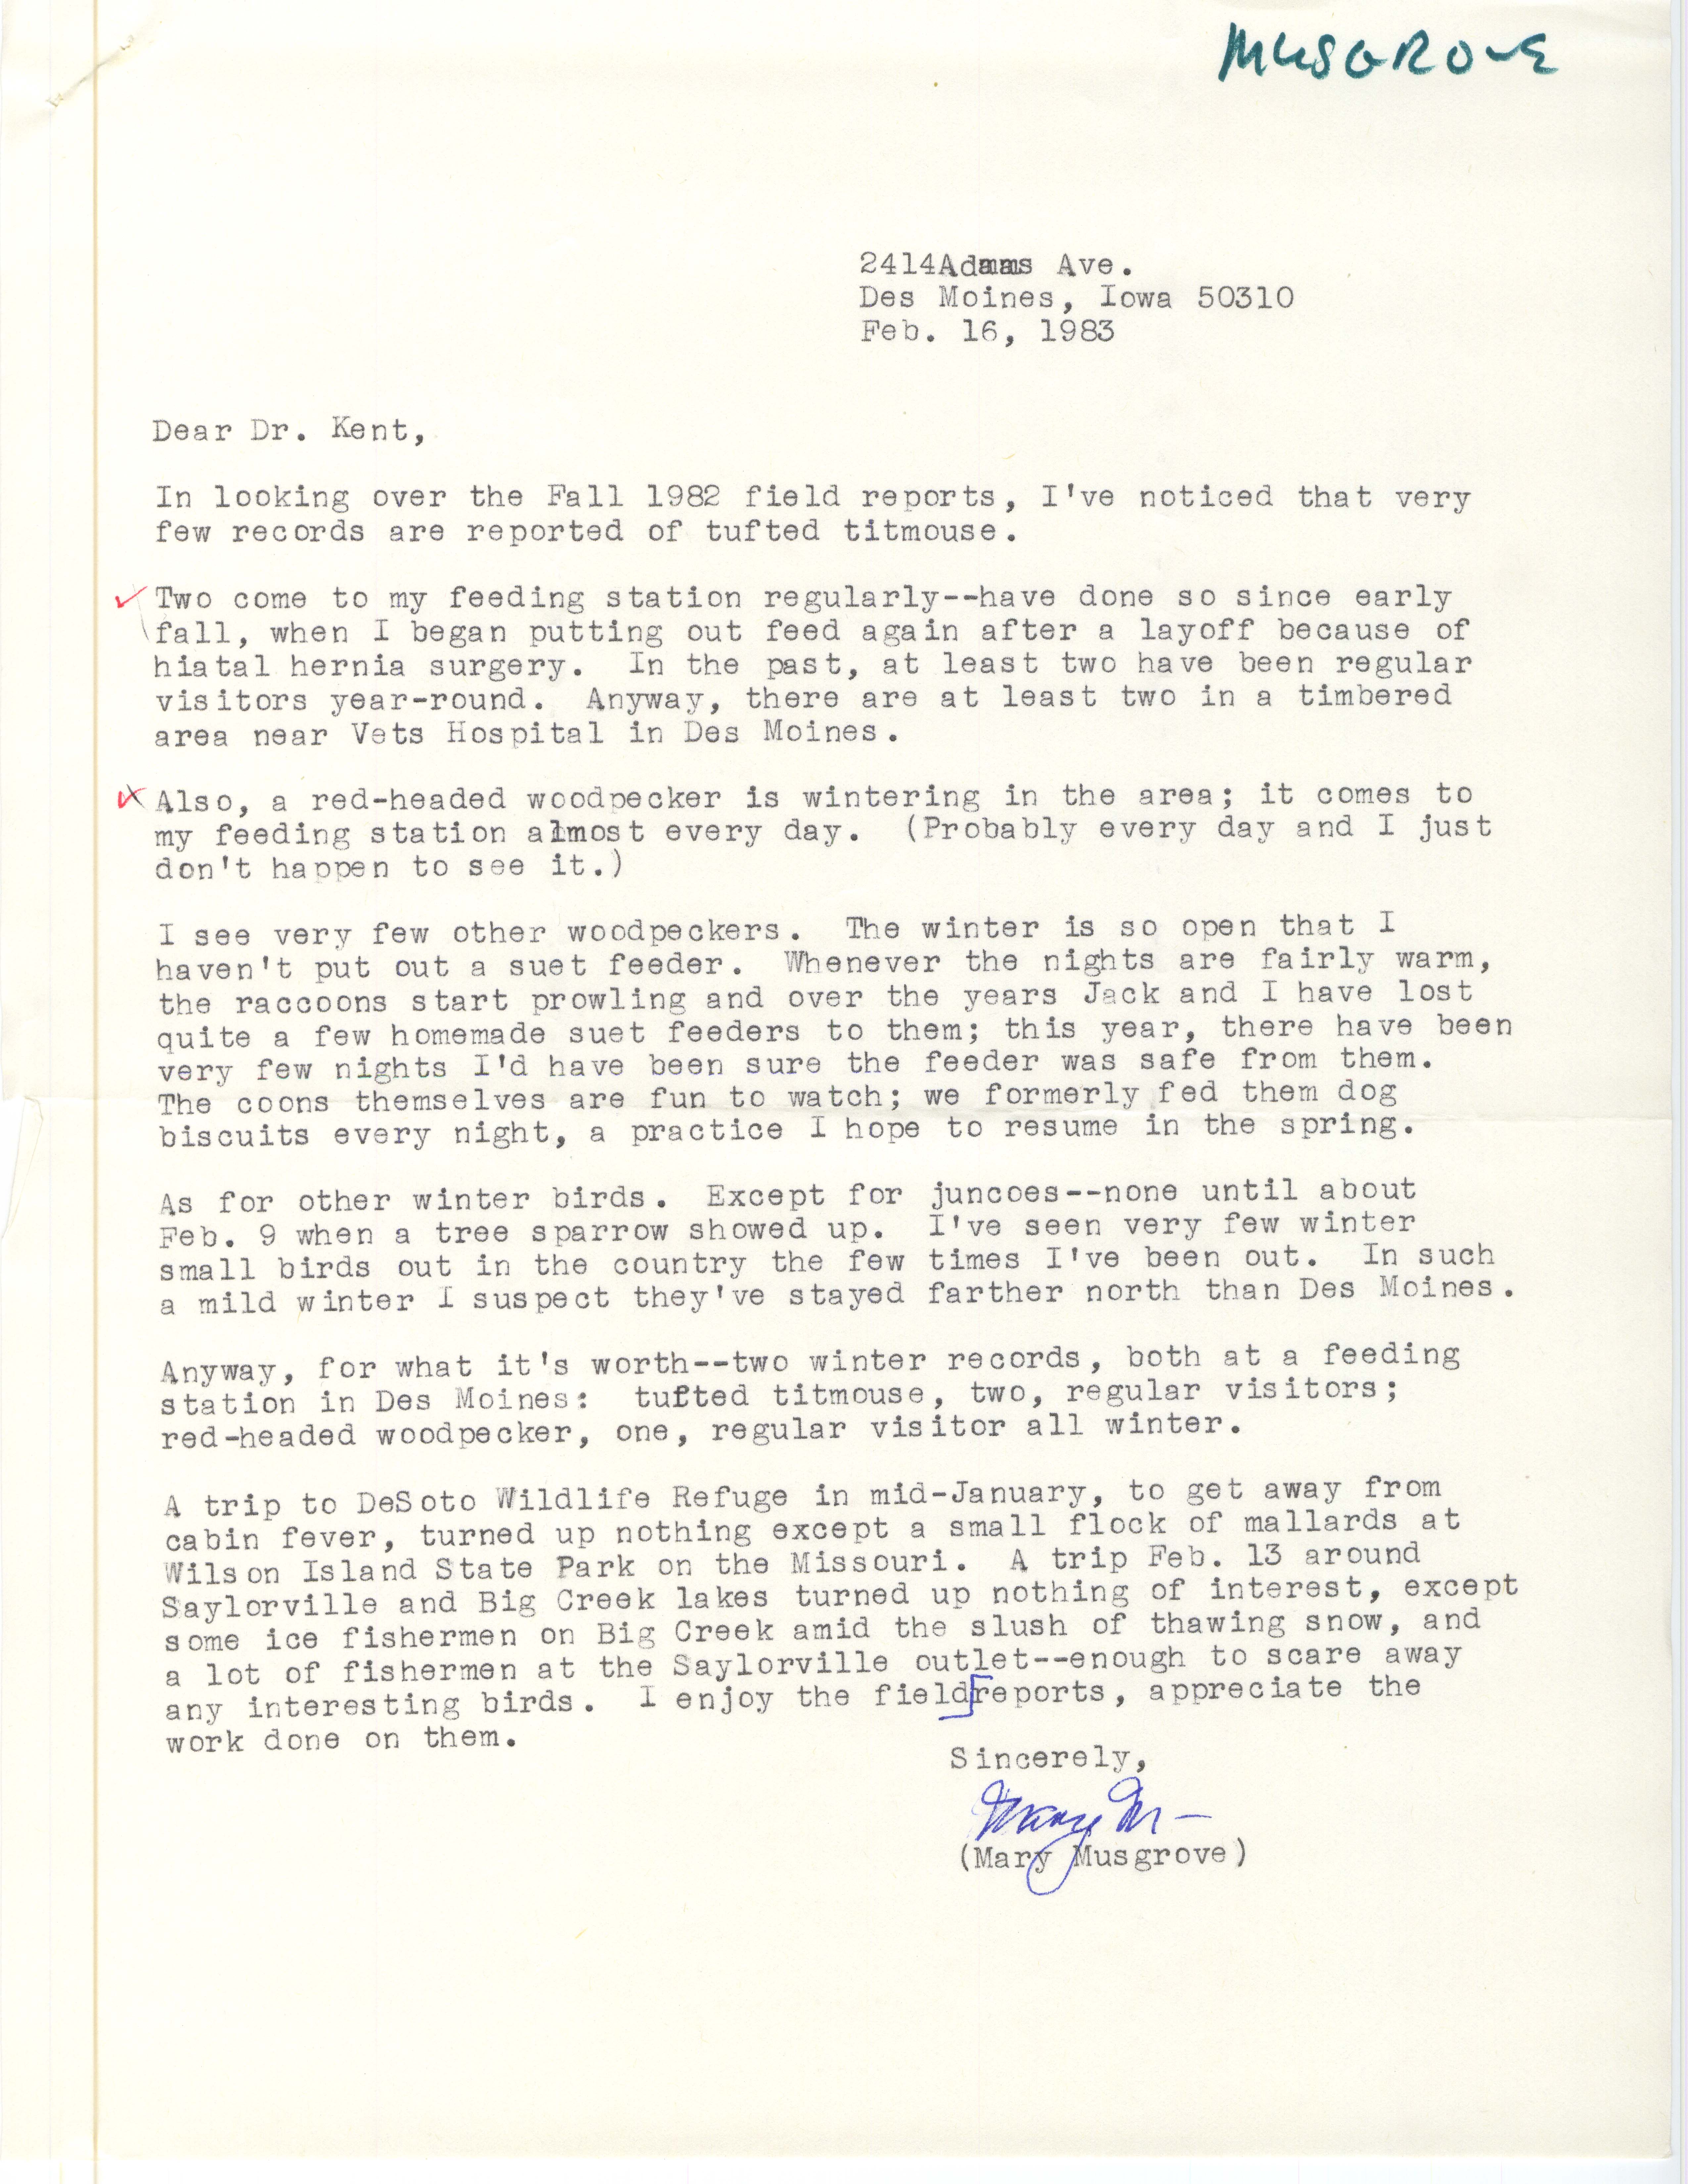 Mary R. Musgrove letter to Thomas H. Kent regarding additional winter bird sightings, February 16, 1983